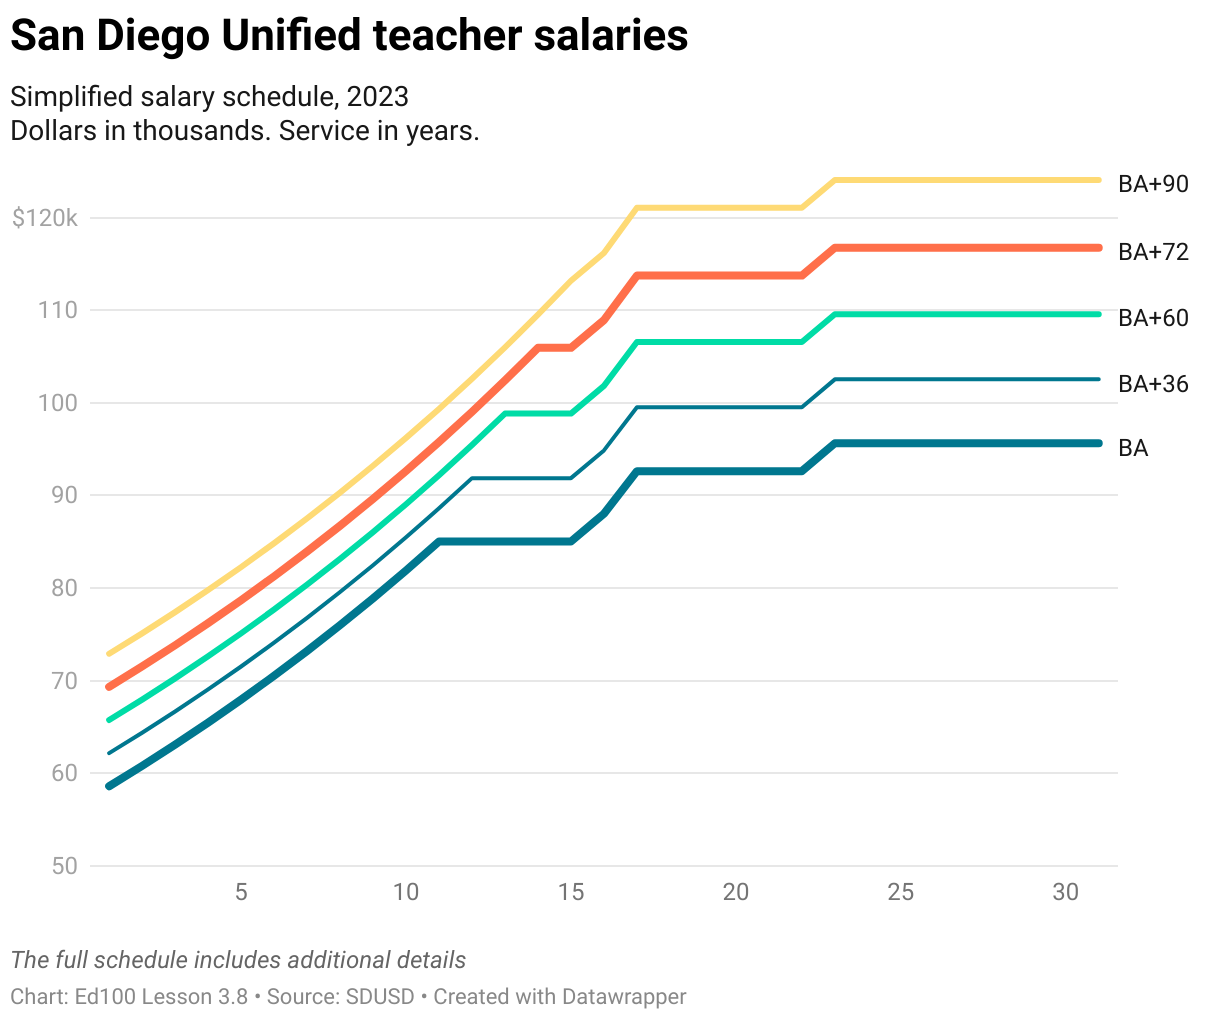 San Diego Unified School District salary schedule for teachers, 2023